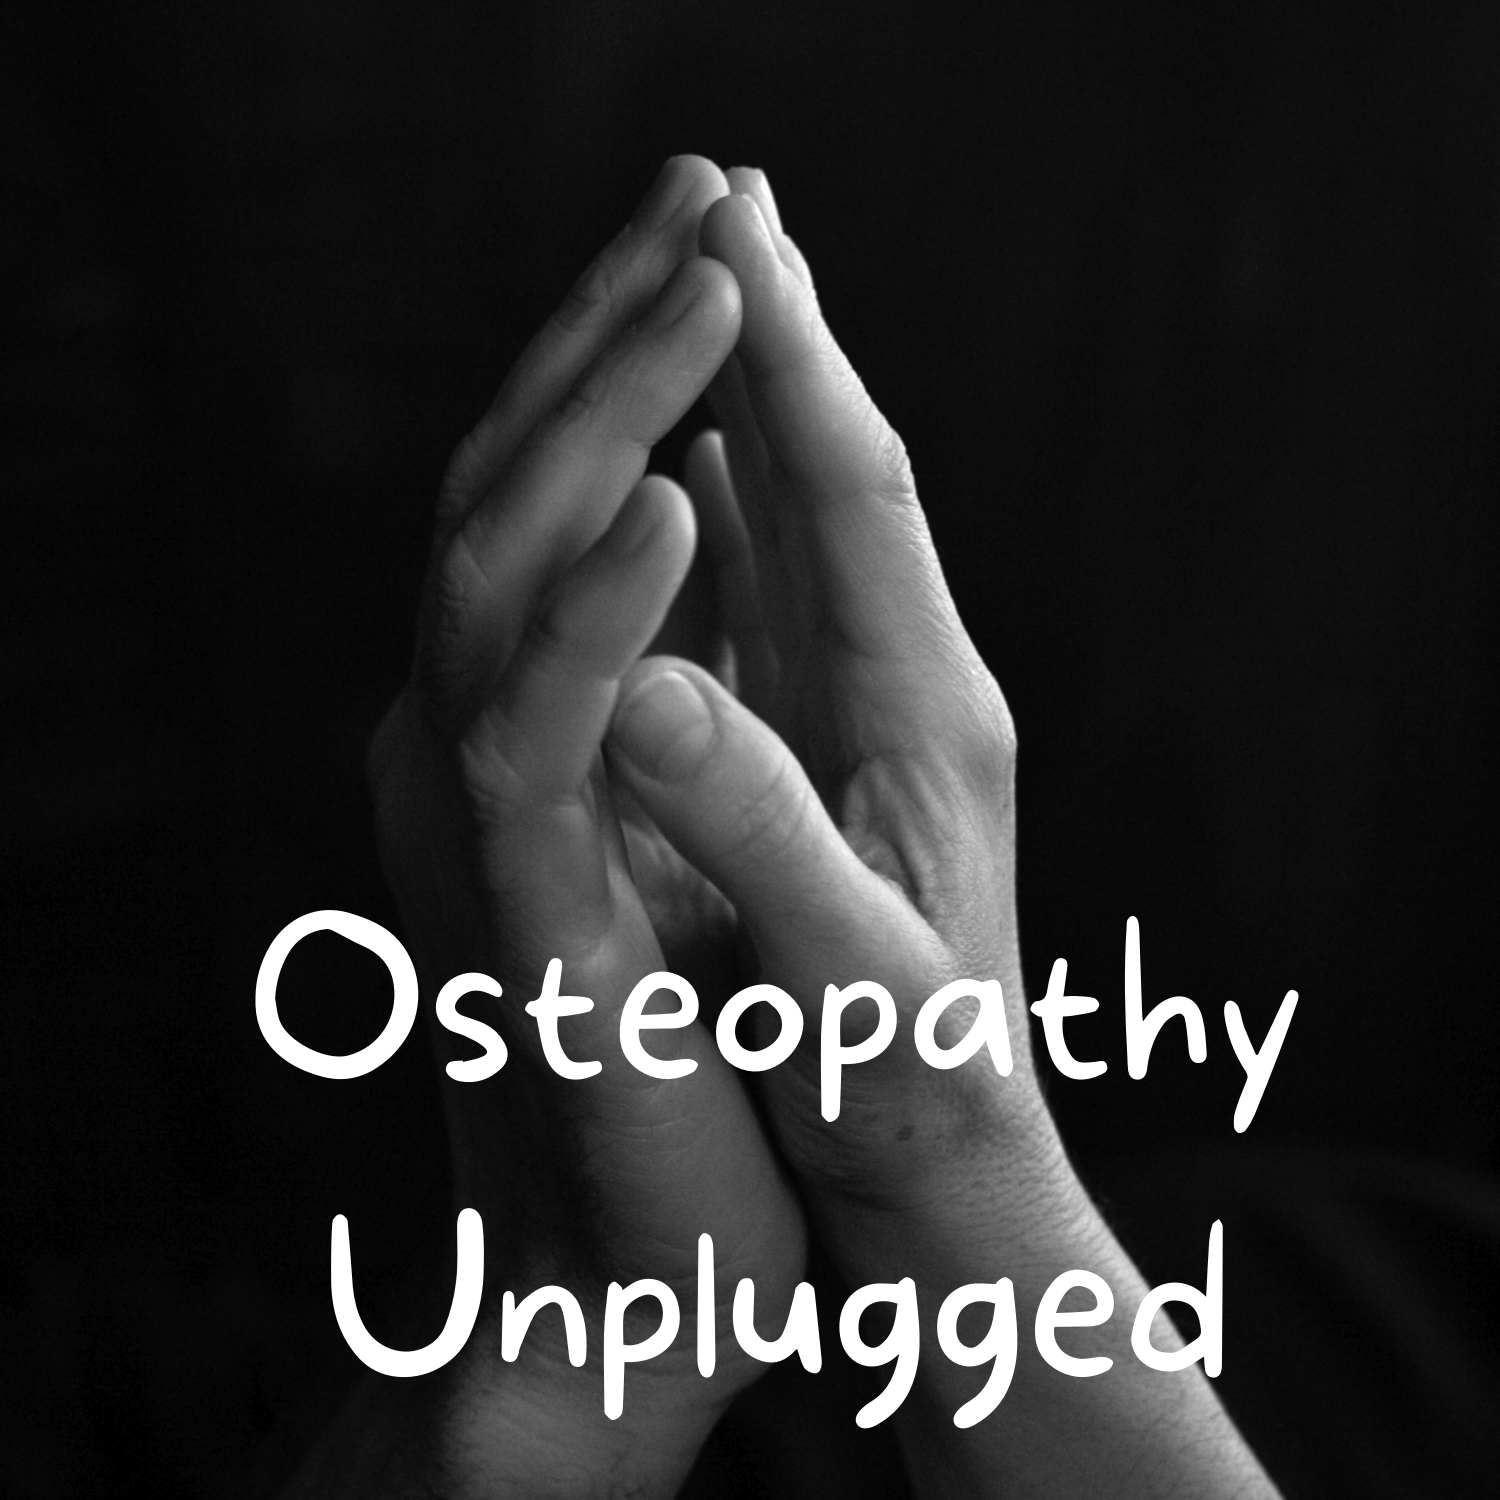 Episode 7 - To Find Health: The Osteopathic Imperative